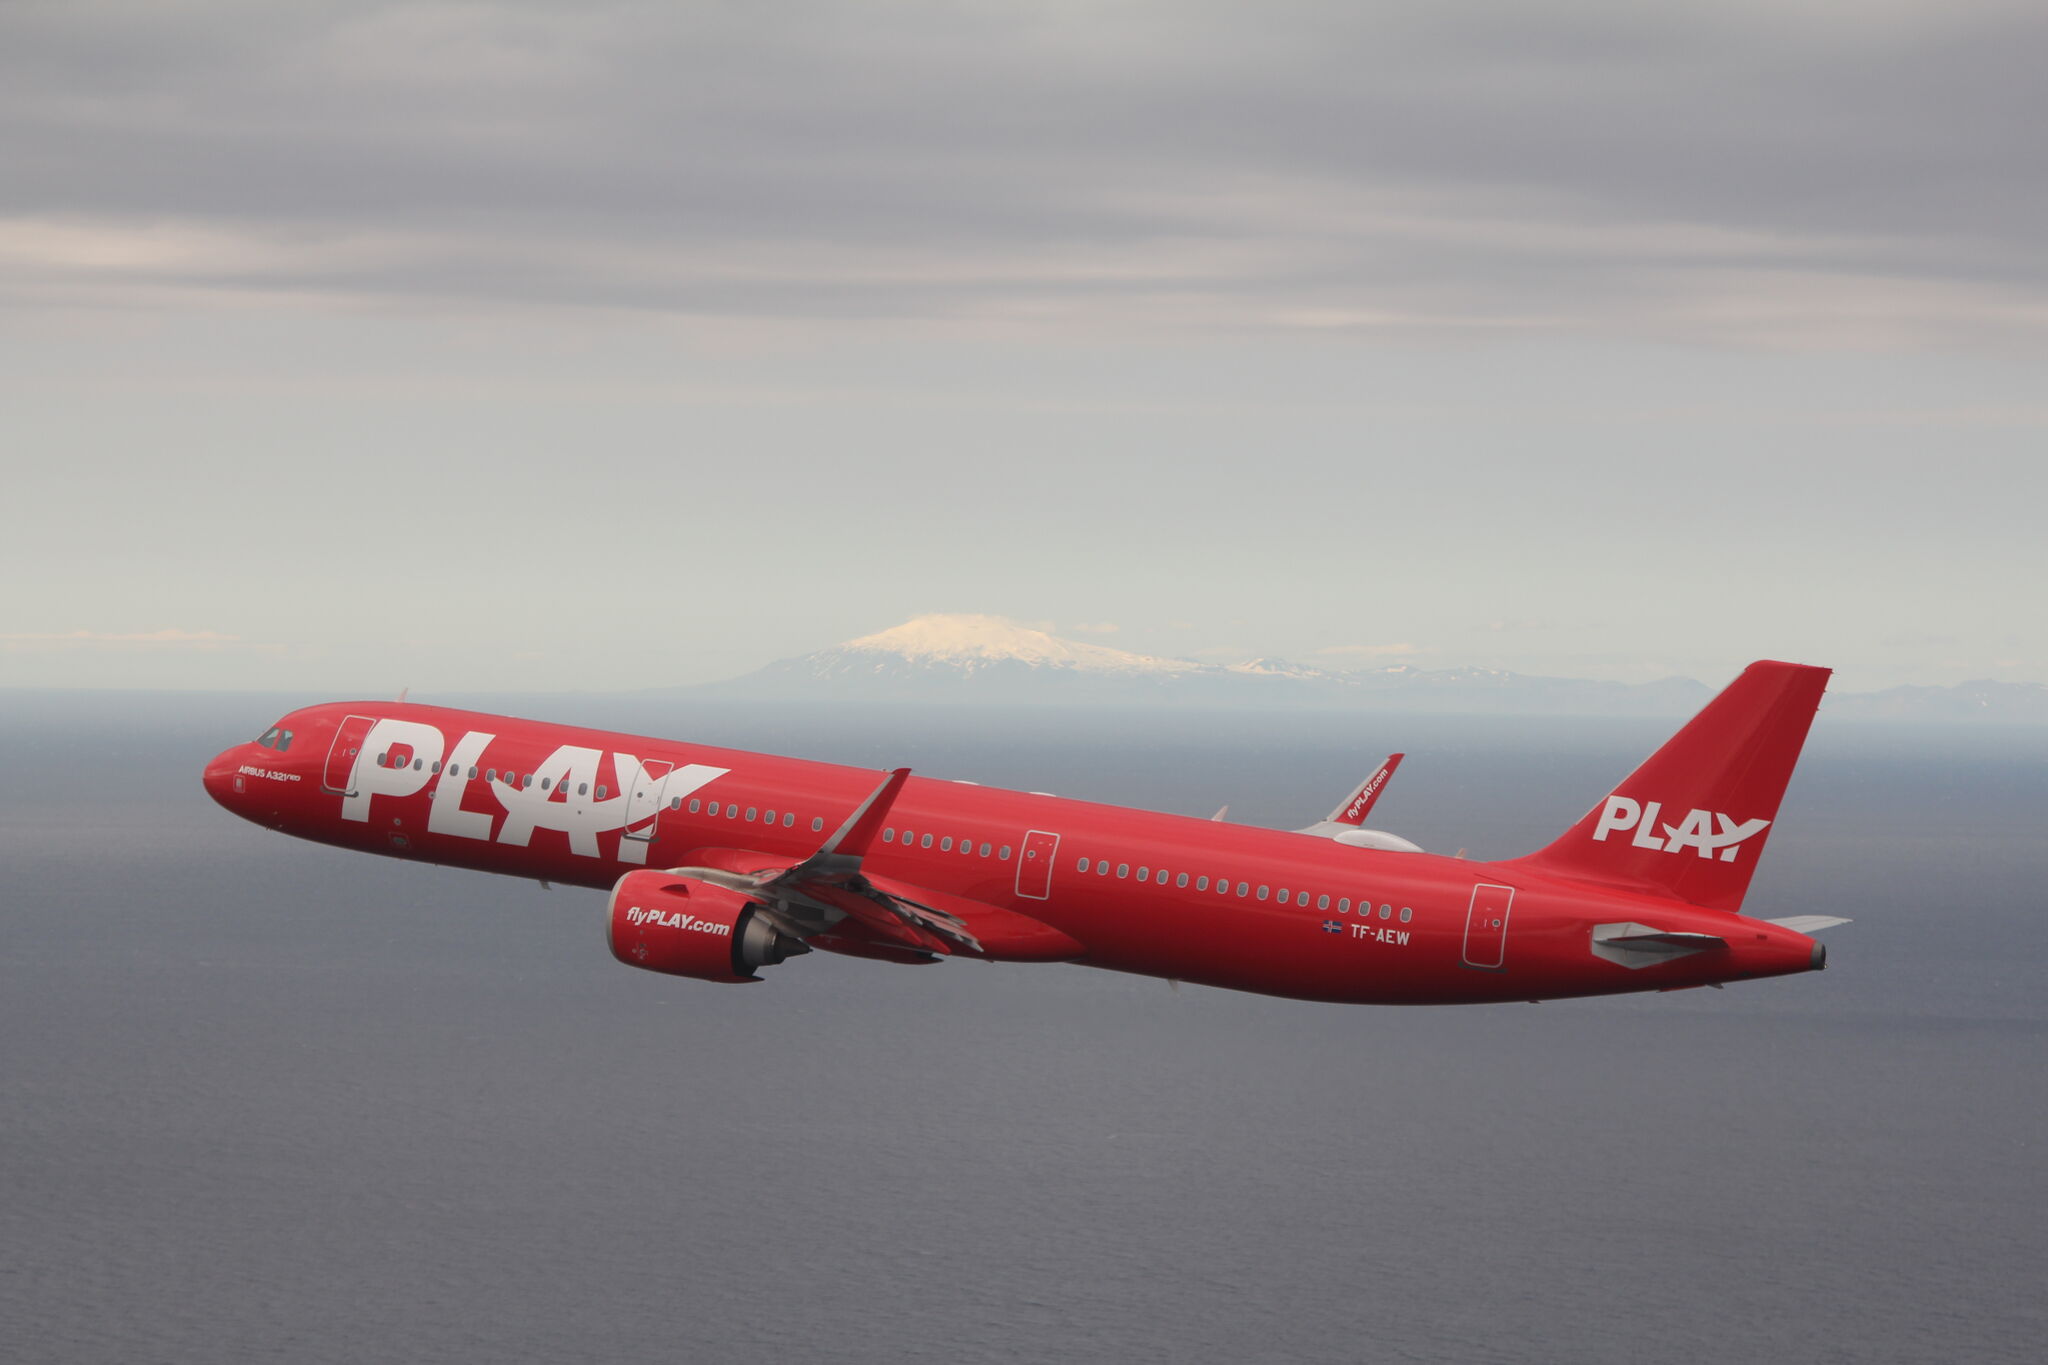 Play Airlines launches flights to Iceland from Stewart with fares